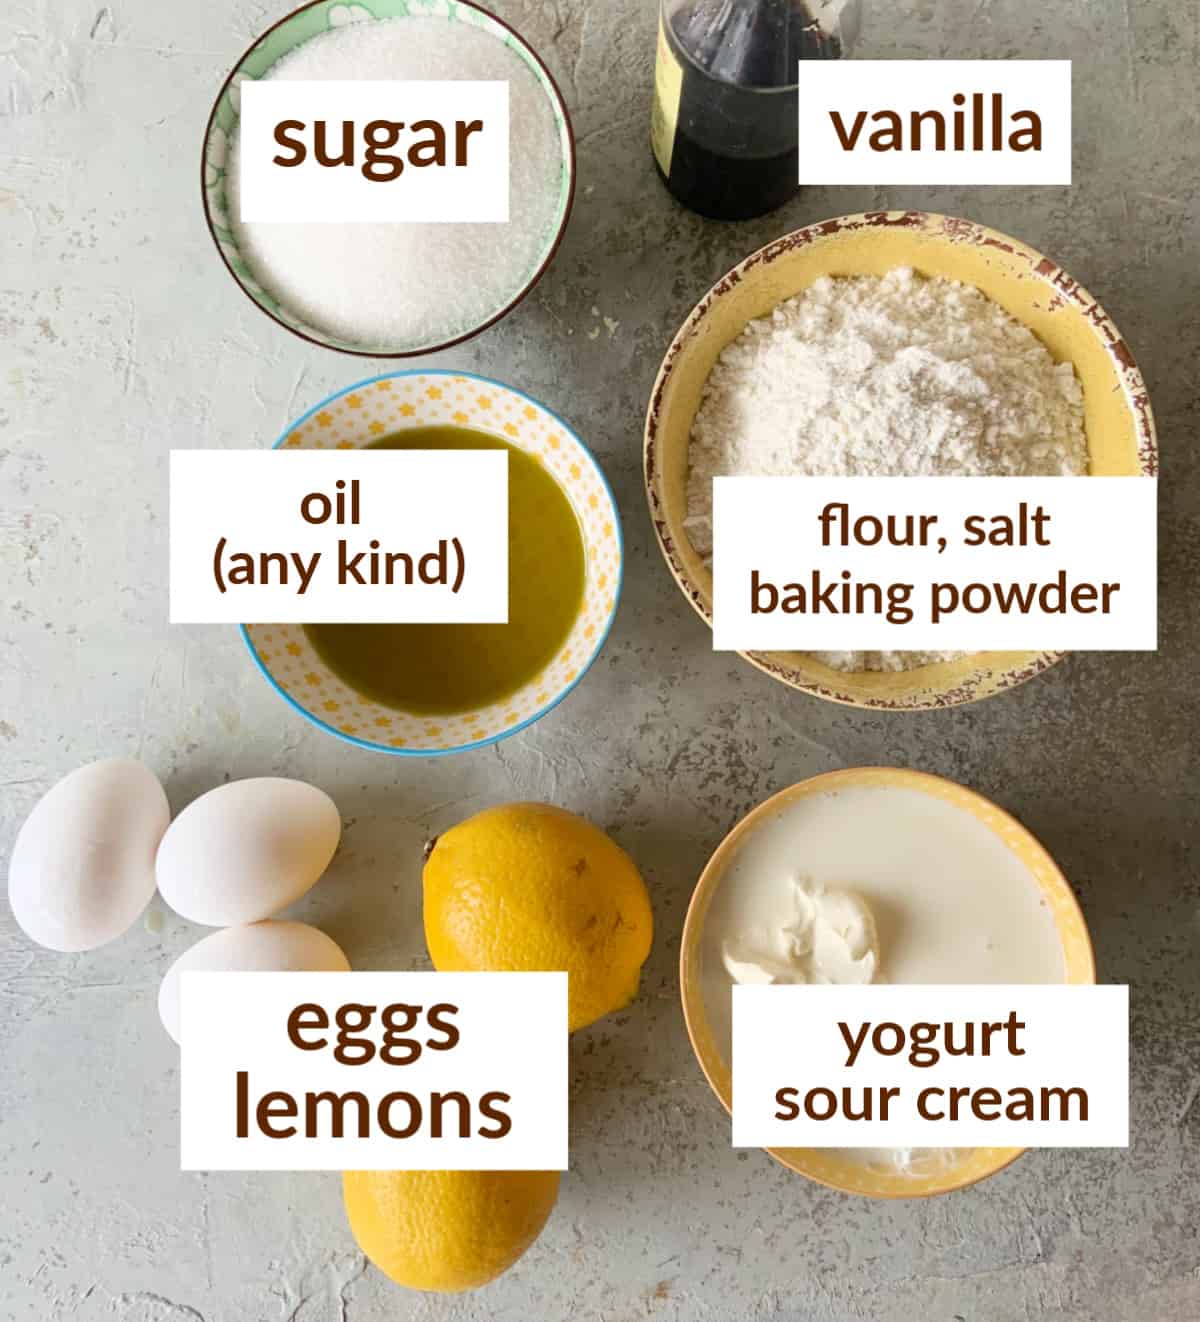 Bowls on a grey surface with ingredients for lemon yogurt cake including eggs, oil, sugar, flour mixture, sour cream.